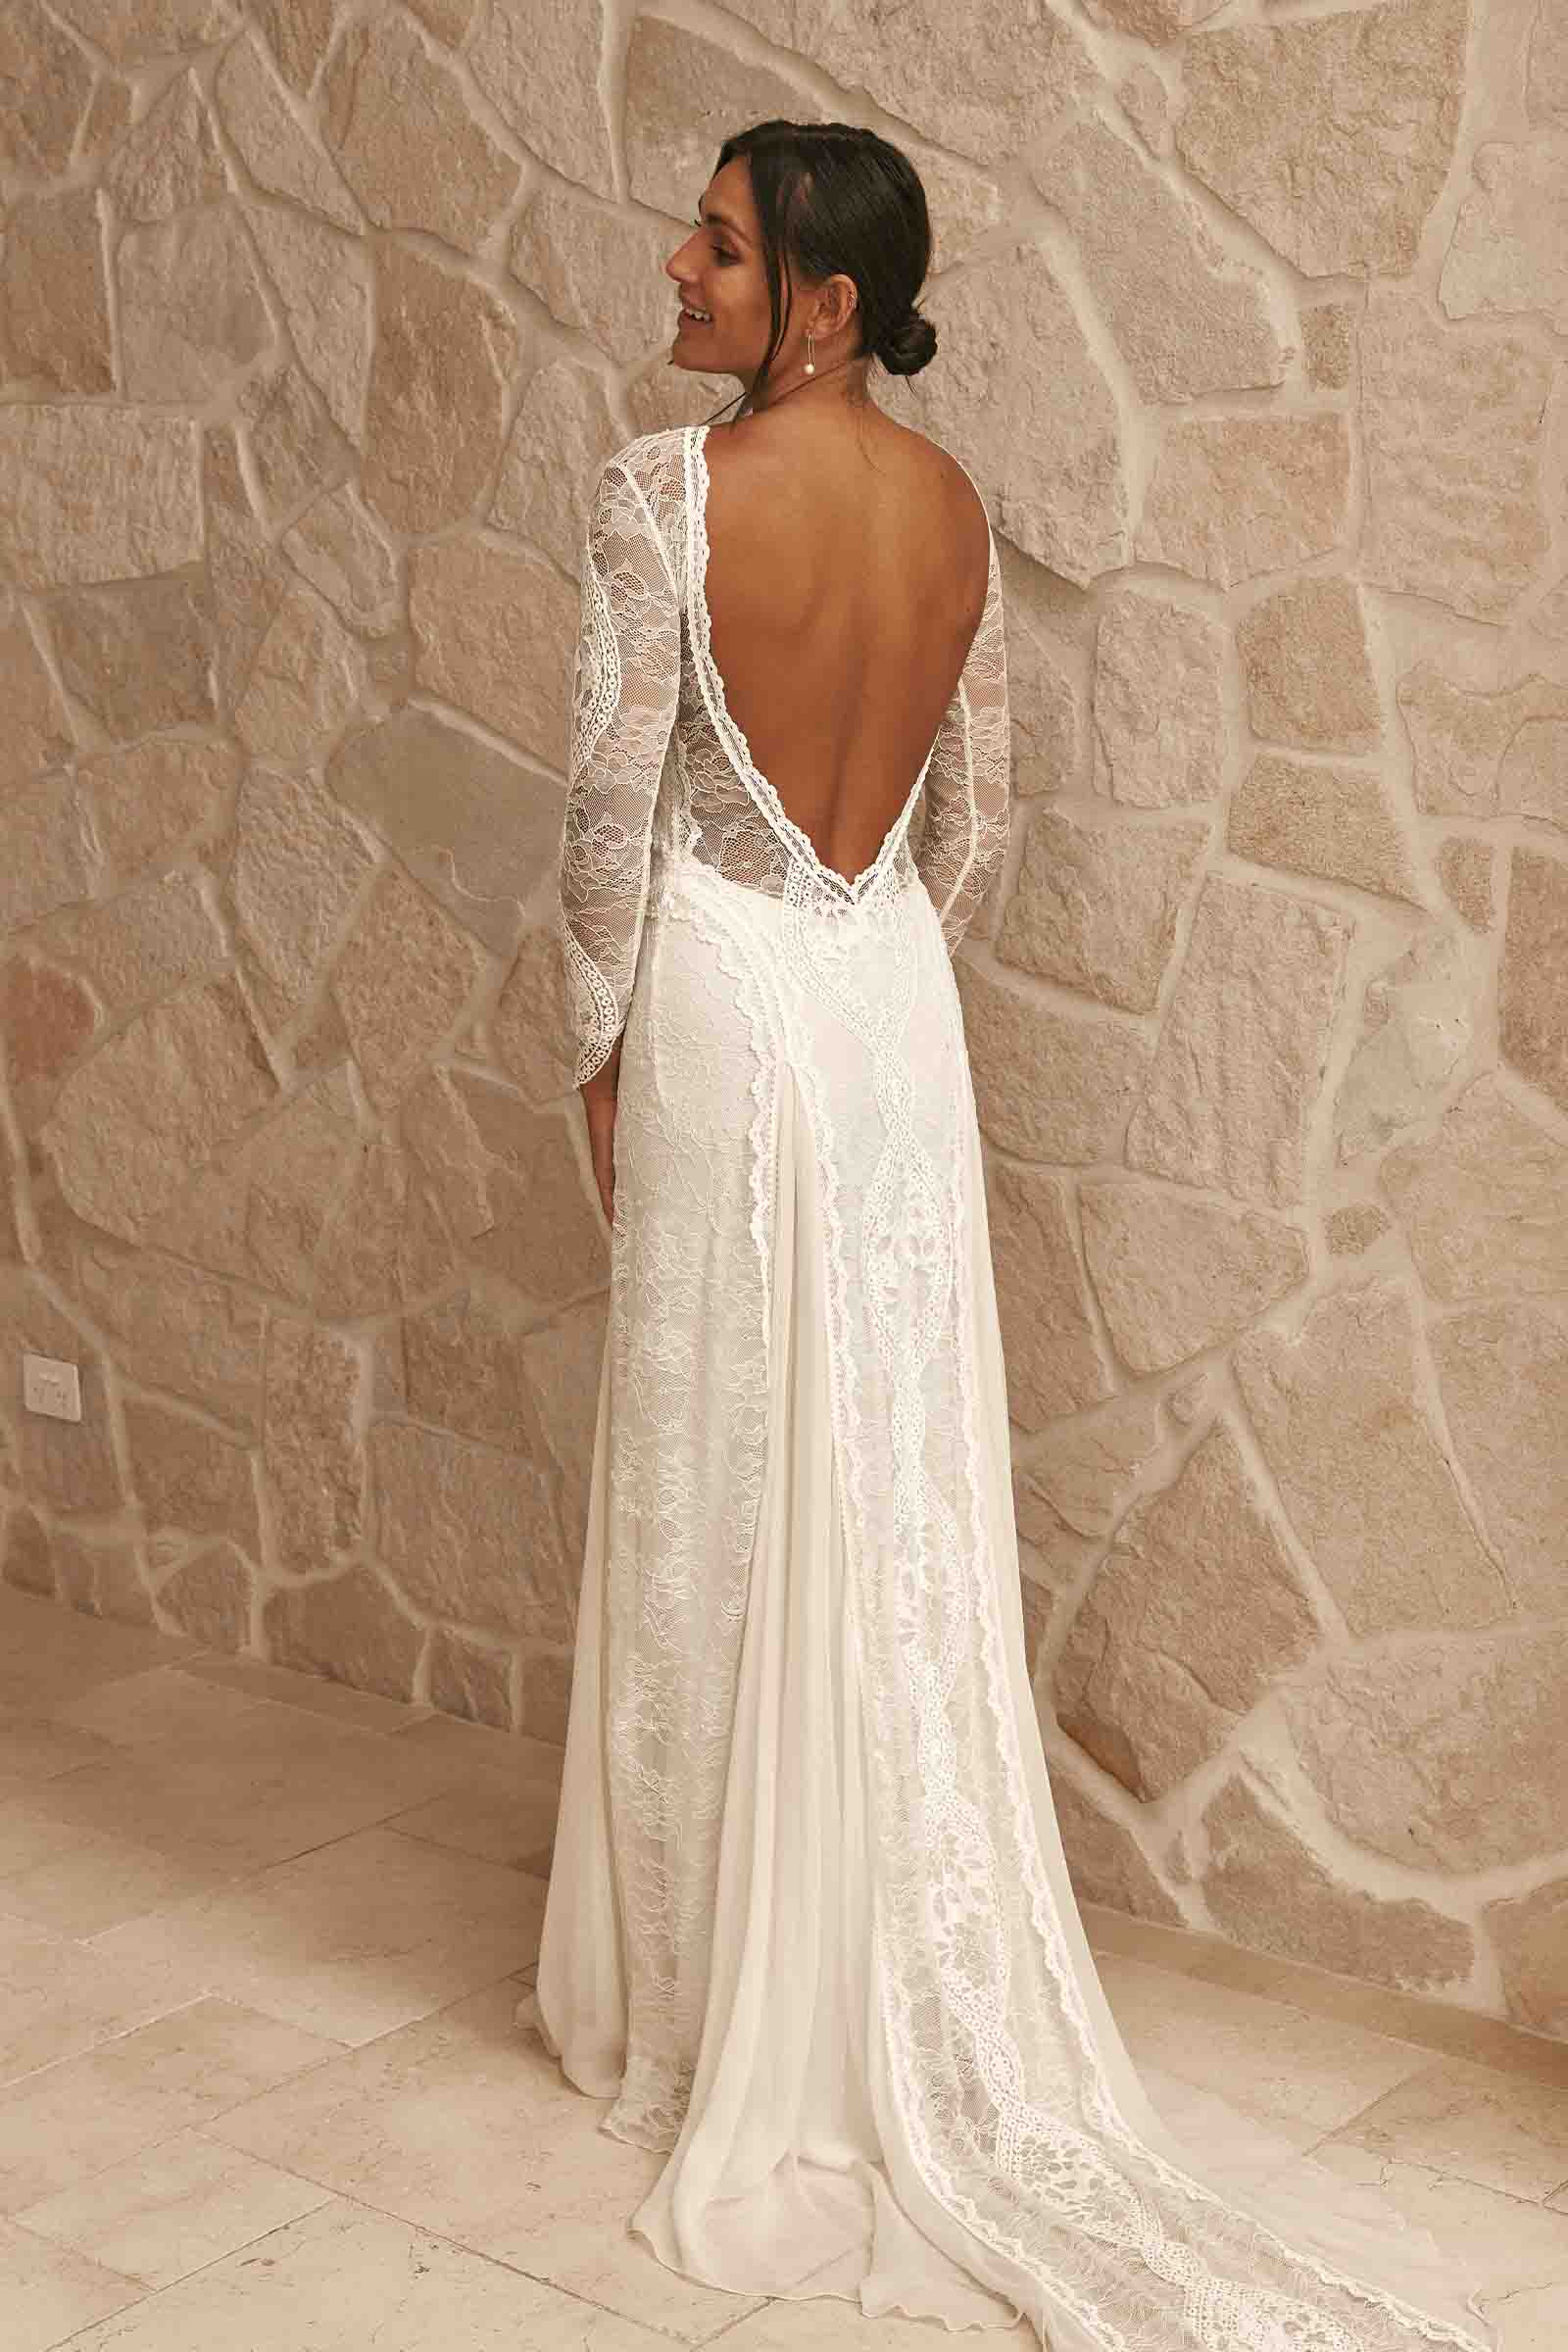 Off Shoulder Plus Mermaid Wedding Dress With Sheer Lace And Long Sleeves  Plus Size Bridal Gown For South African Beach Weddings From Startdress,  $95.79 | DHgate.Com